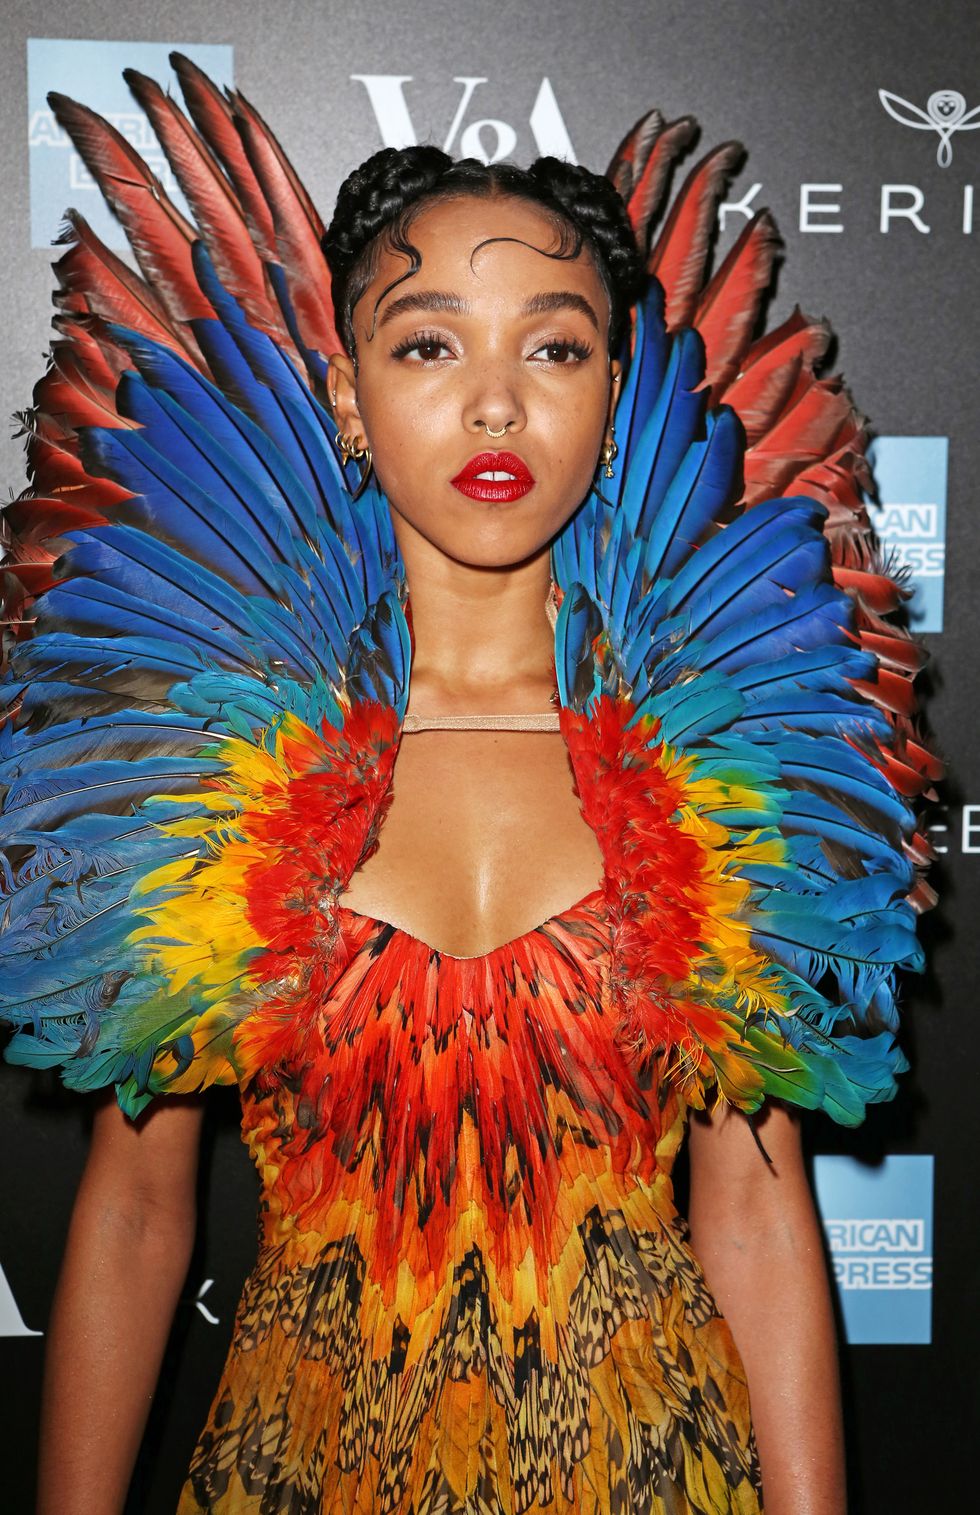 FKA Twigs dressed up as an actual parrot at the Alexander McQueen benefit dinner